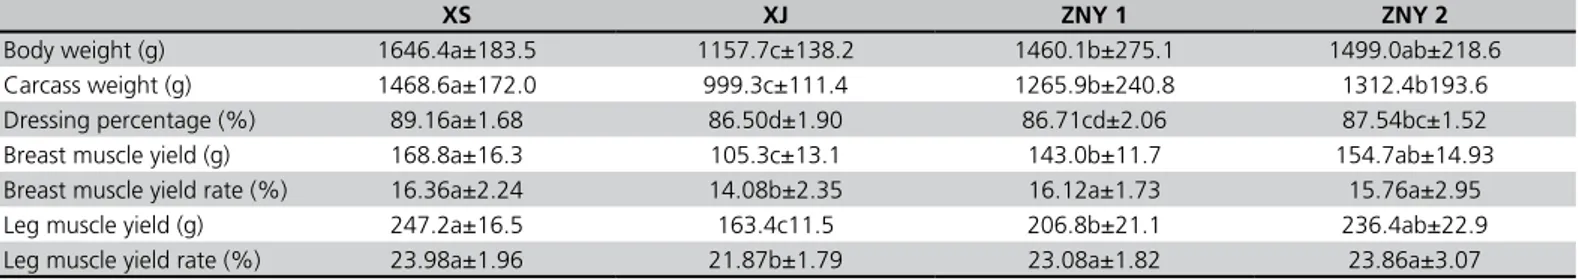 Table 2 - Means and standard errors (SE) of chicken body weight and carcass yield.